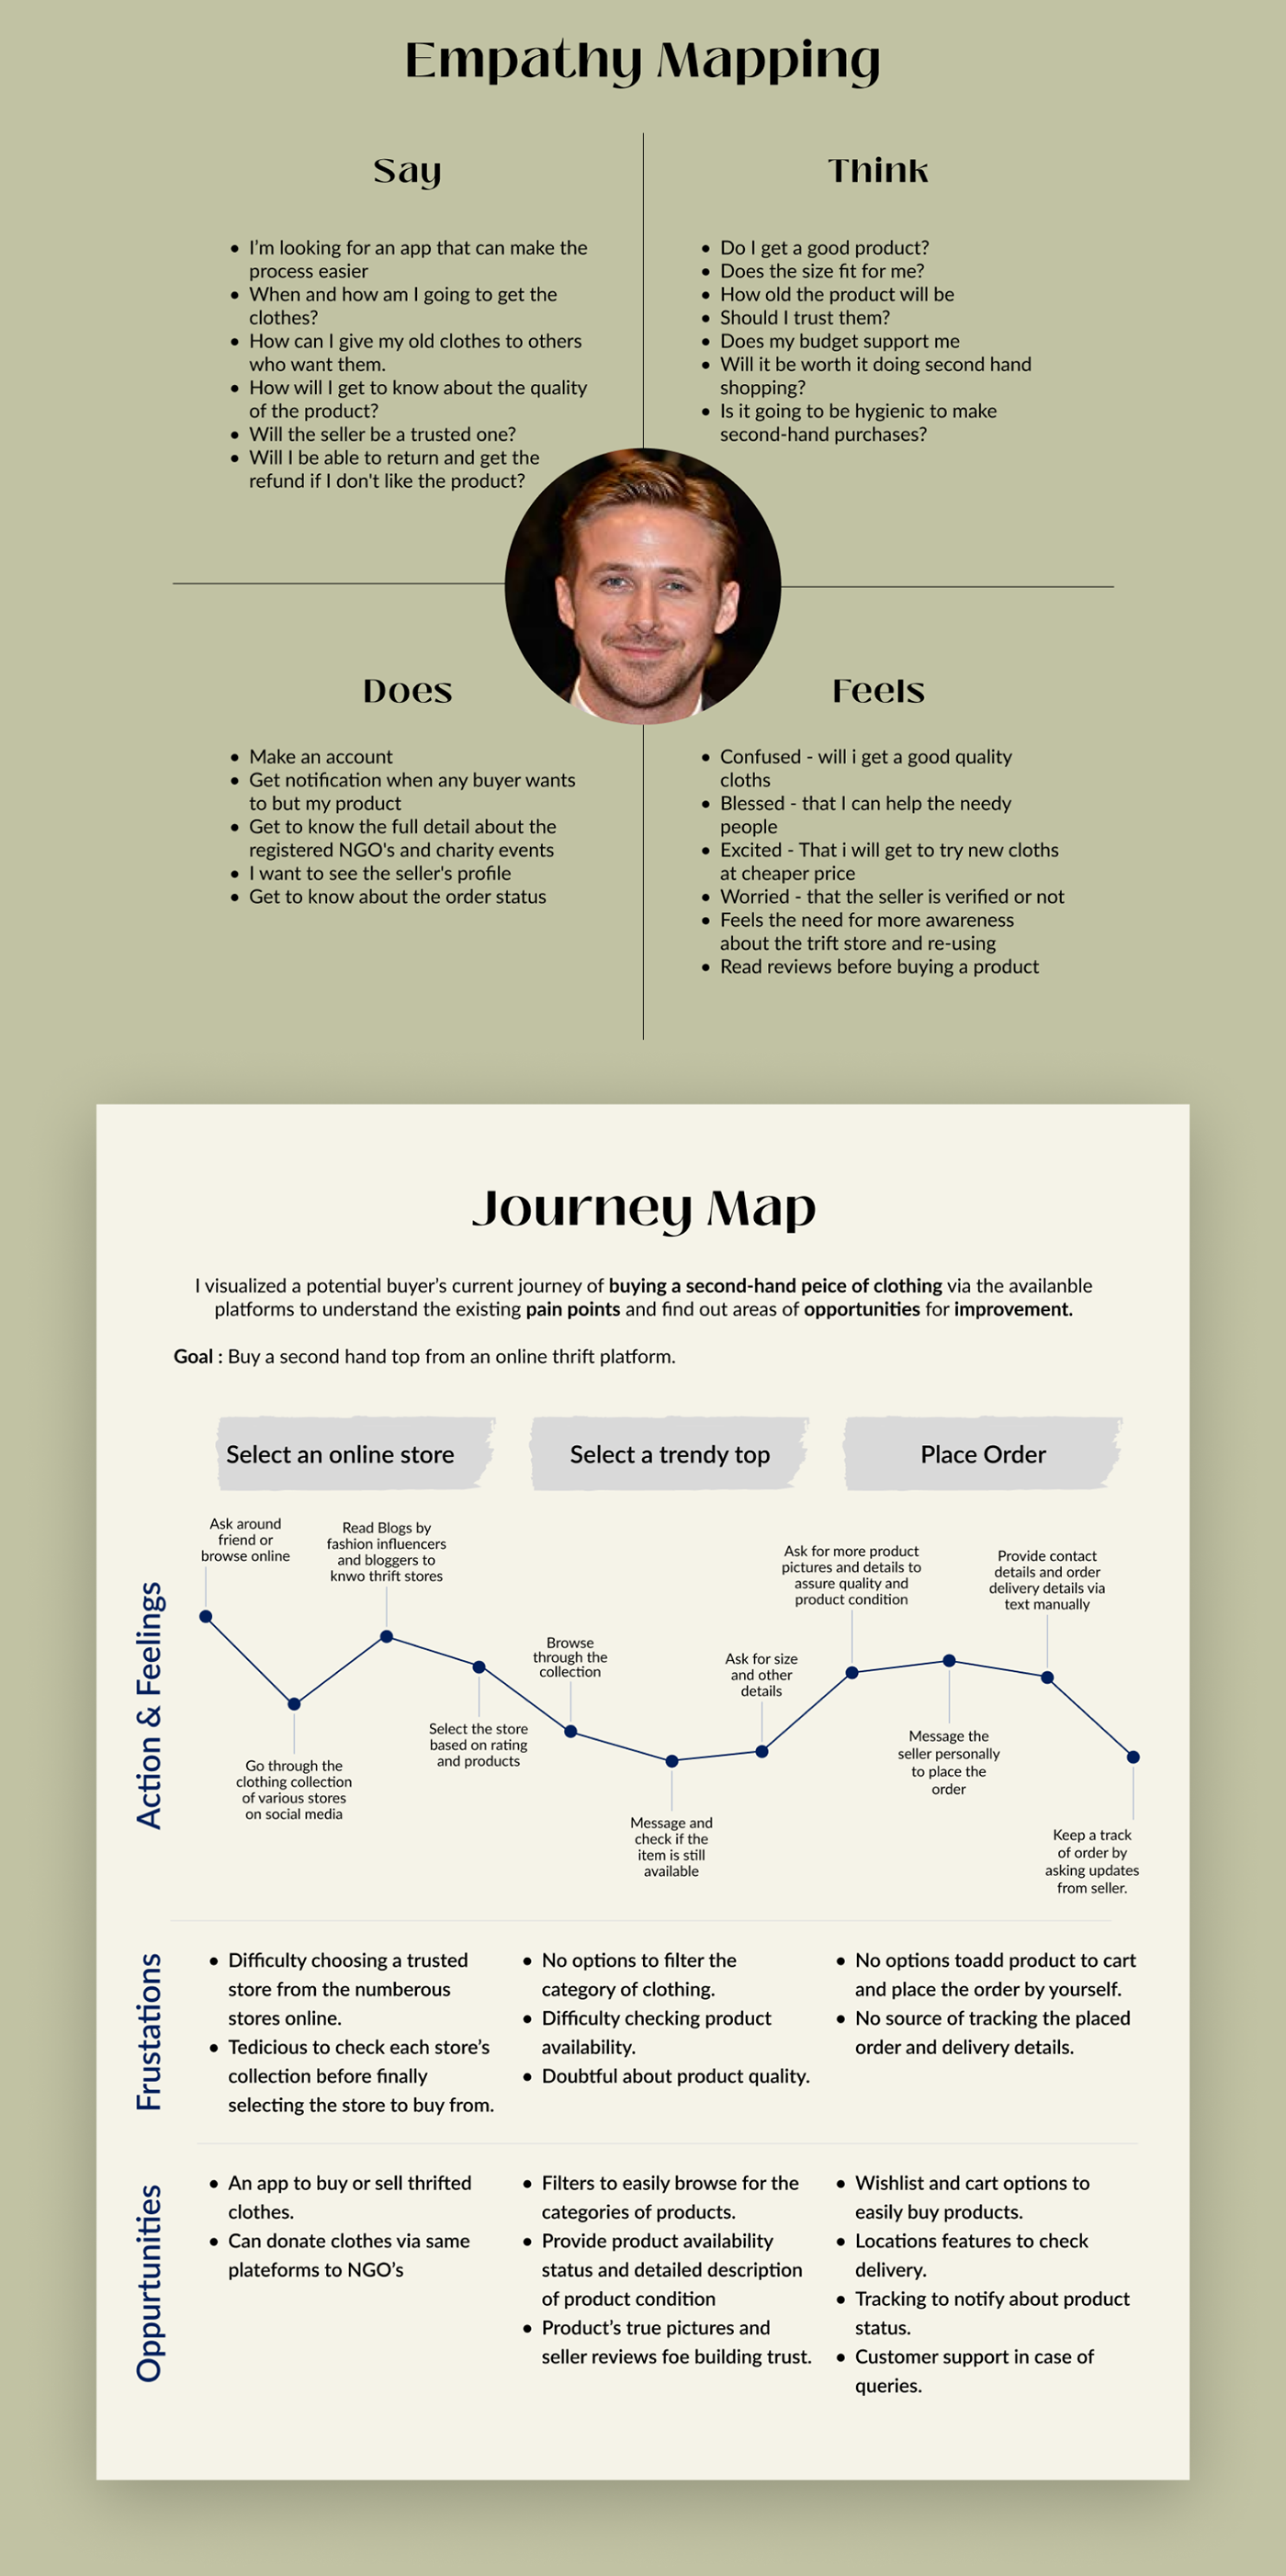 empathy mapping information architecture  journey map Mobile app research ui design UI/UX user flow ux visual design